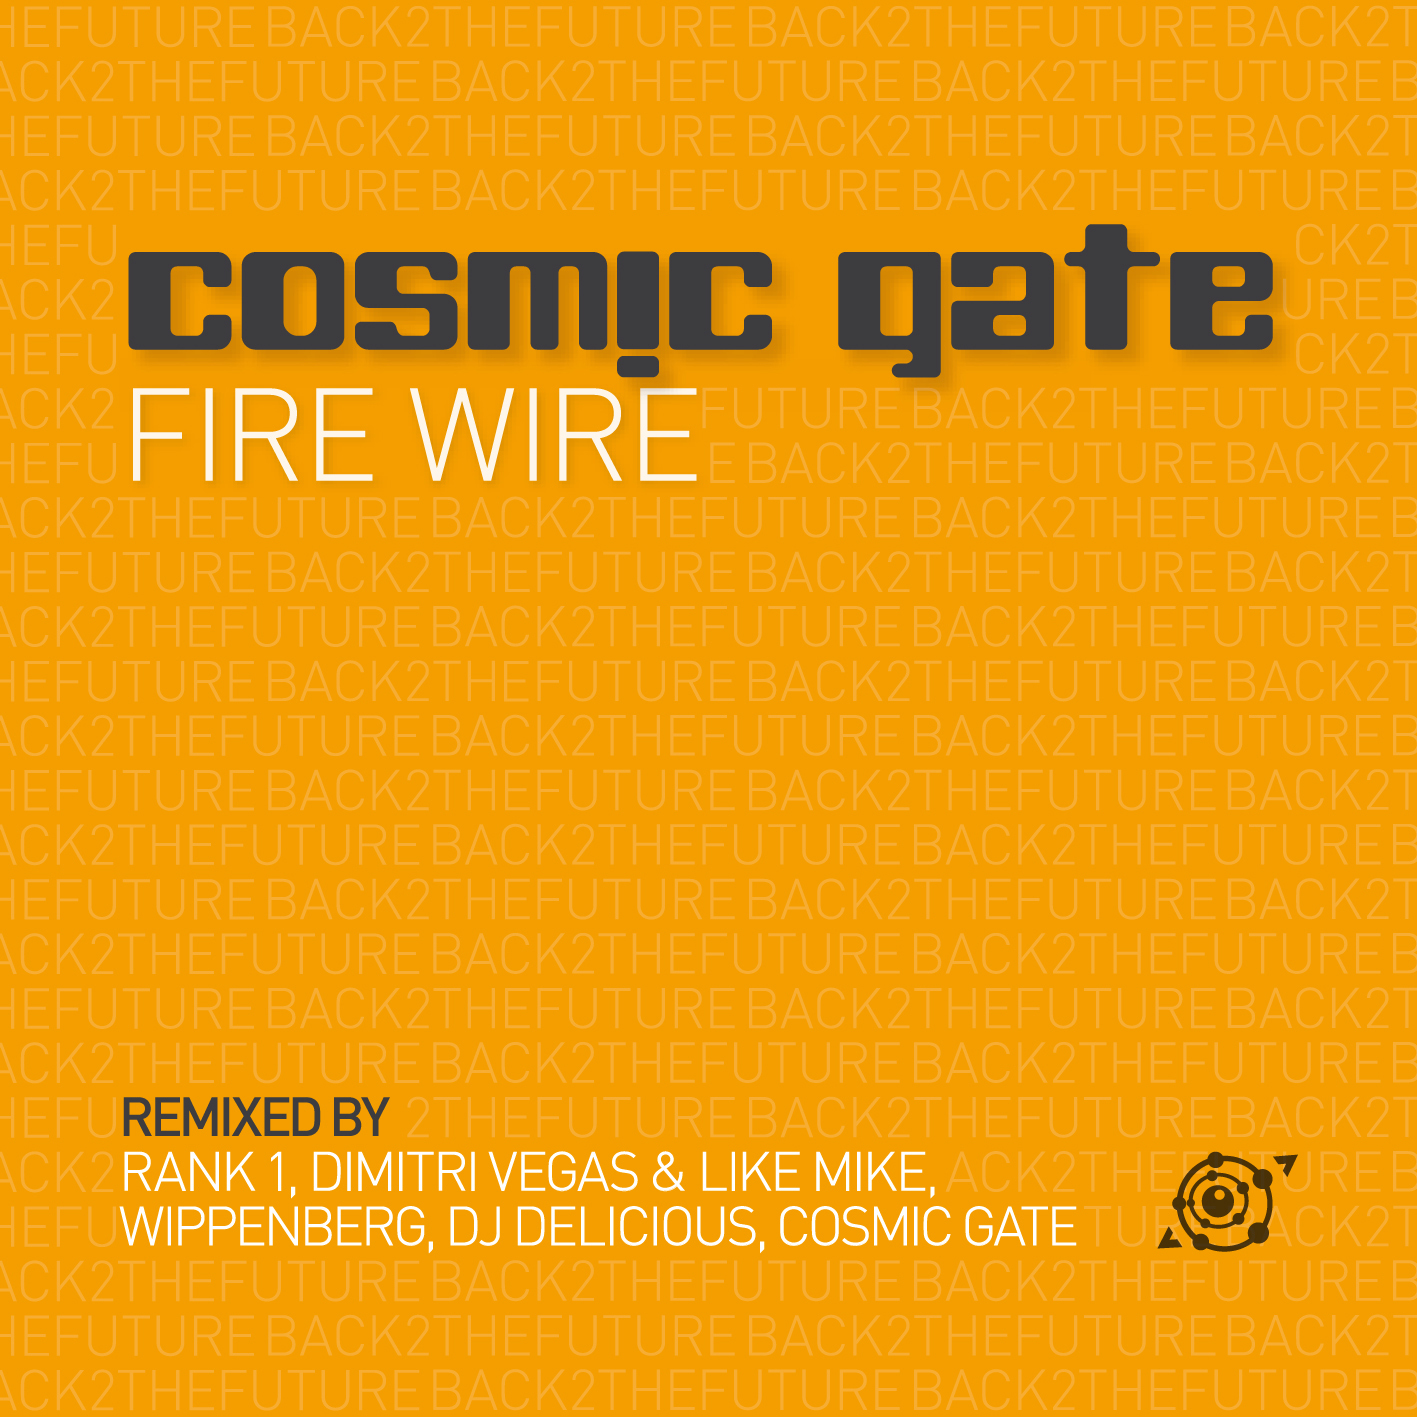 Fire Wire (Dimitri Vegas And Like Mike Remix)